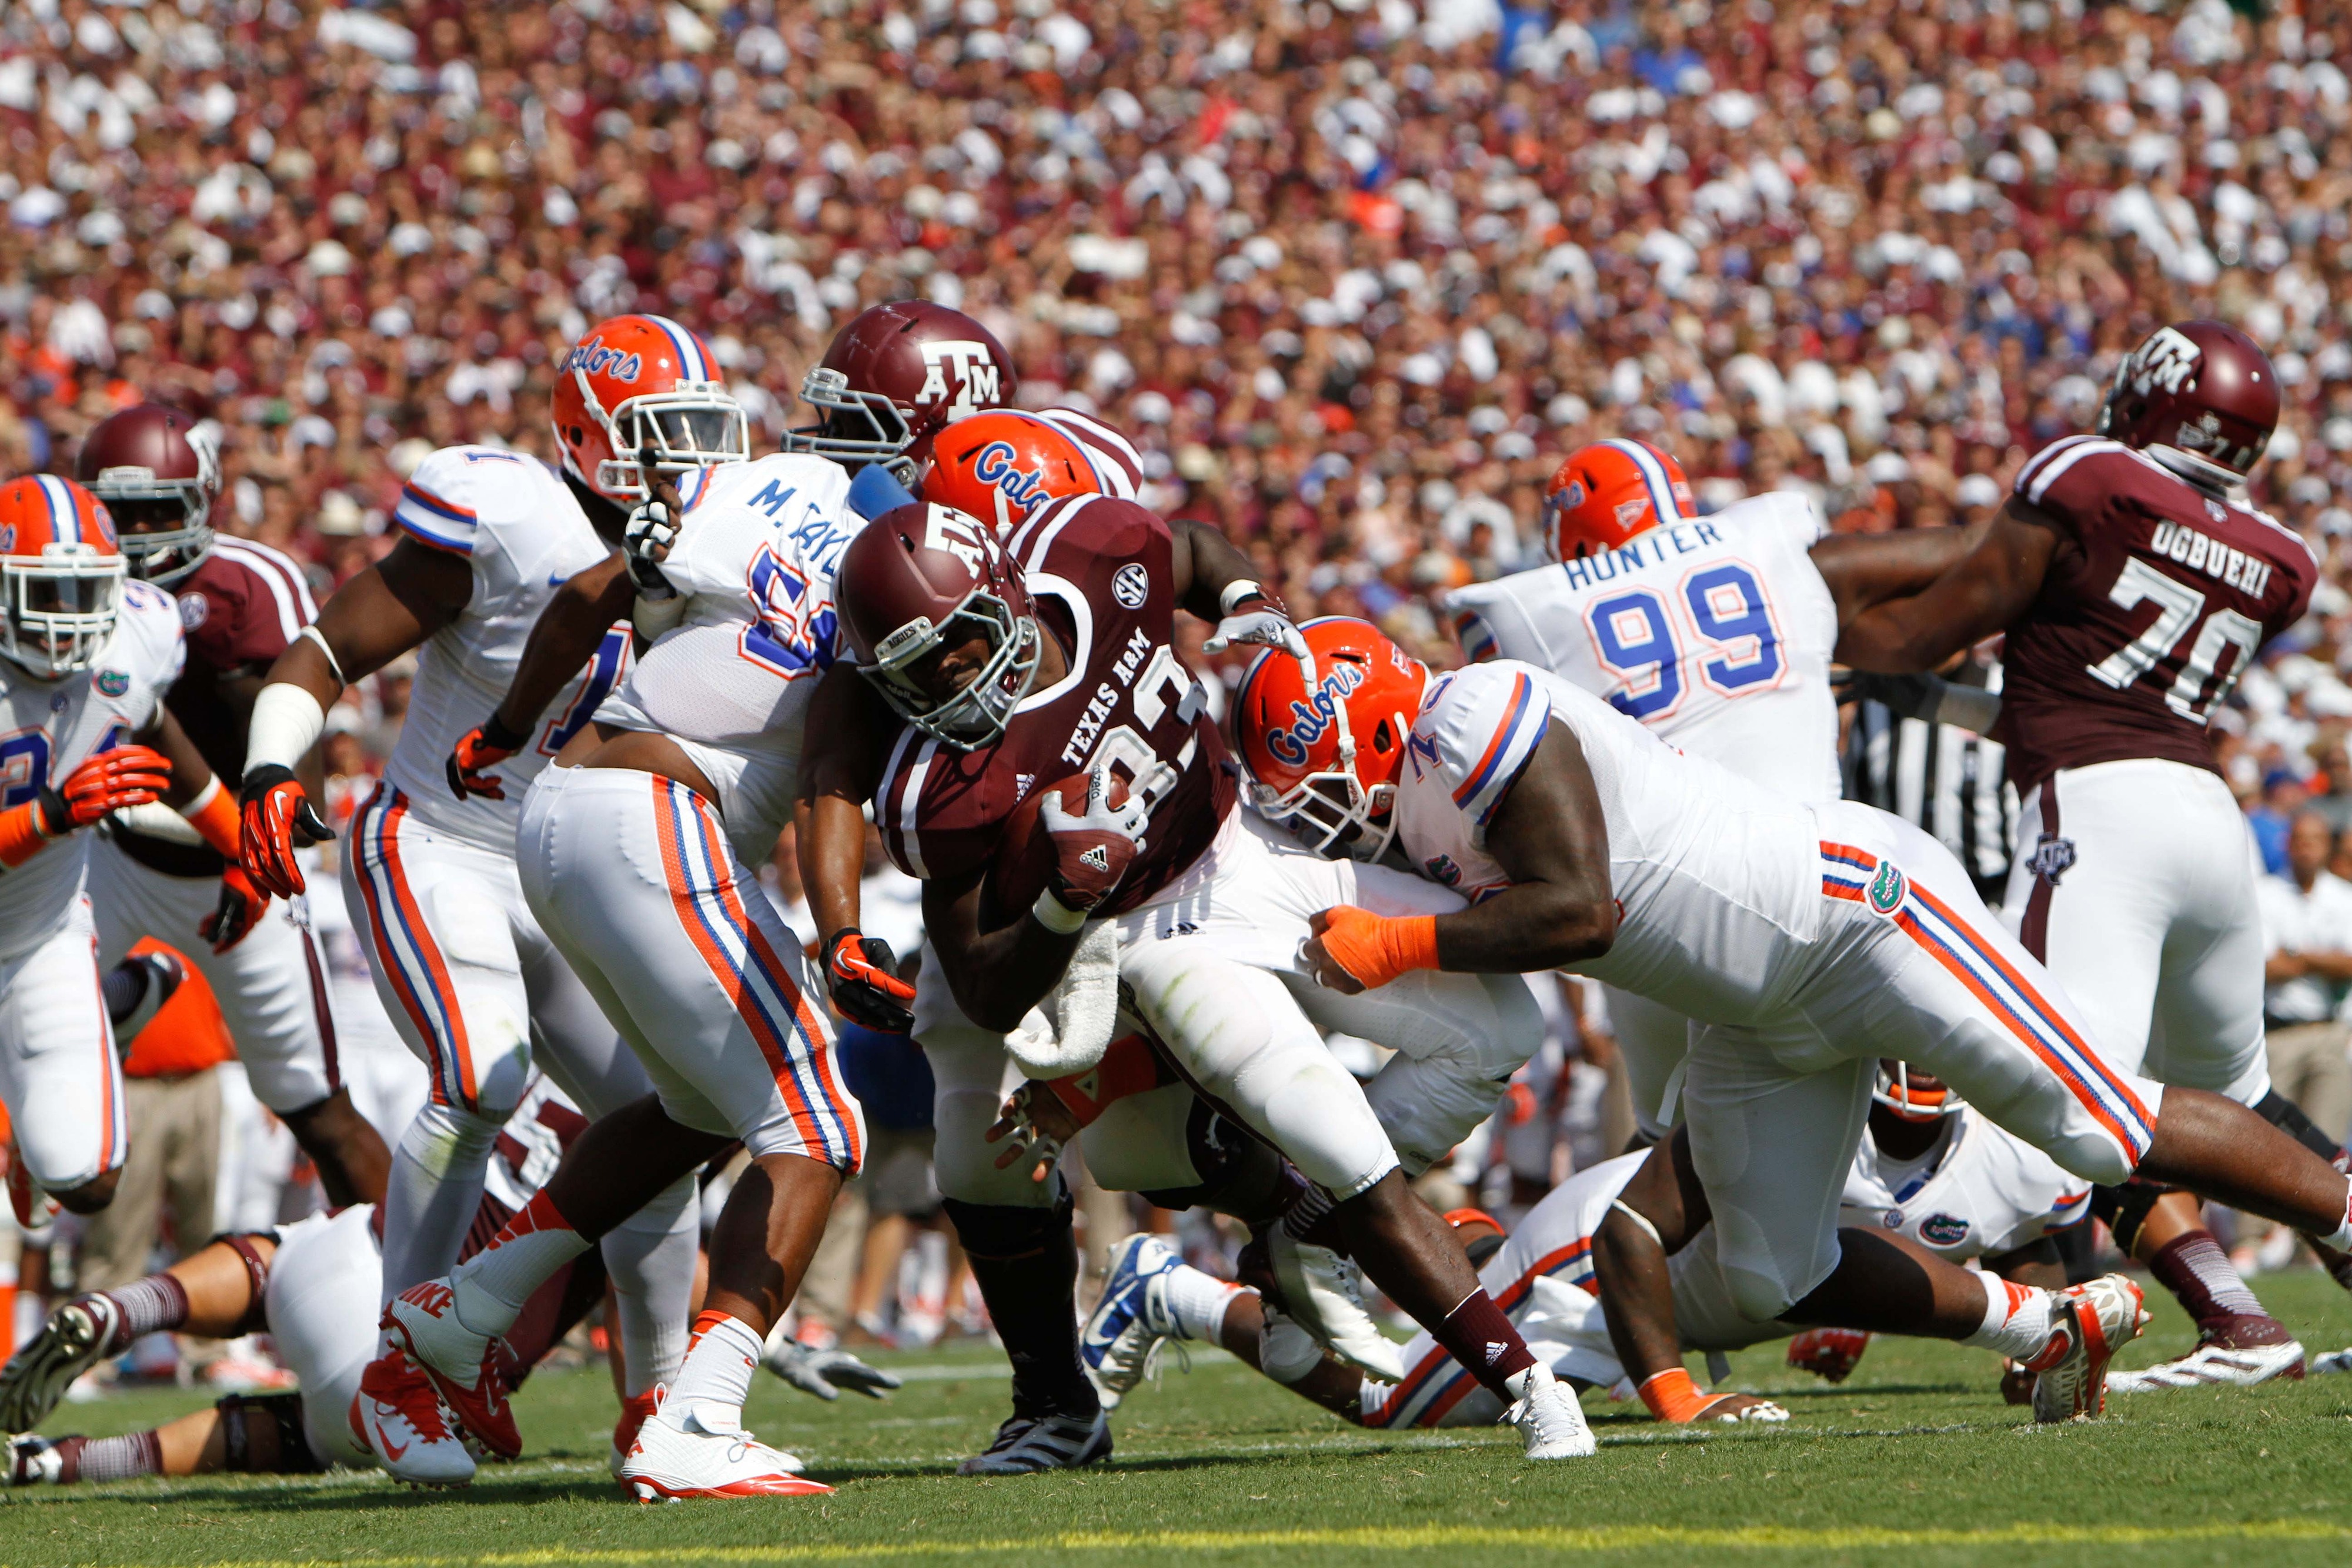 Sep 8, 2012; College Station, TX, USA; Texas A&M Aggies running back Christine Michael (33) runs the ball against the Florida Gators in the second quarter at Kyle Field. Mandatory Credit: Brett Davis-US PRESSWIRE